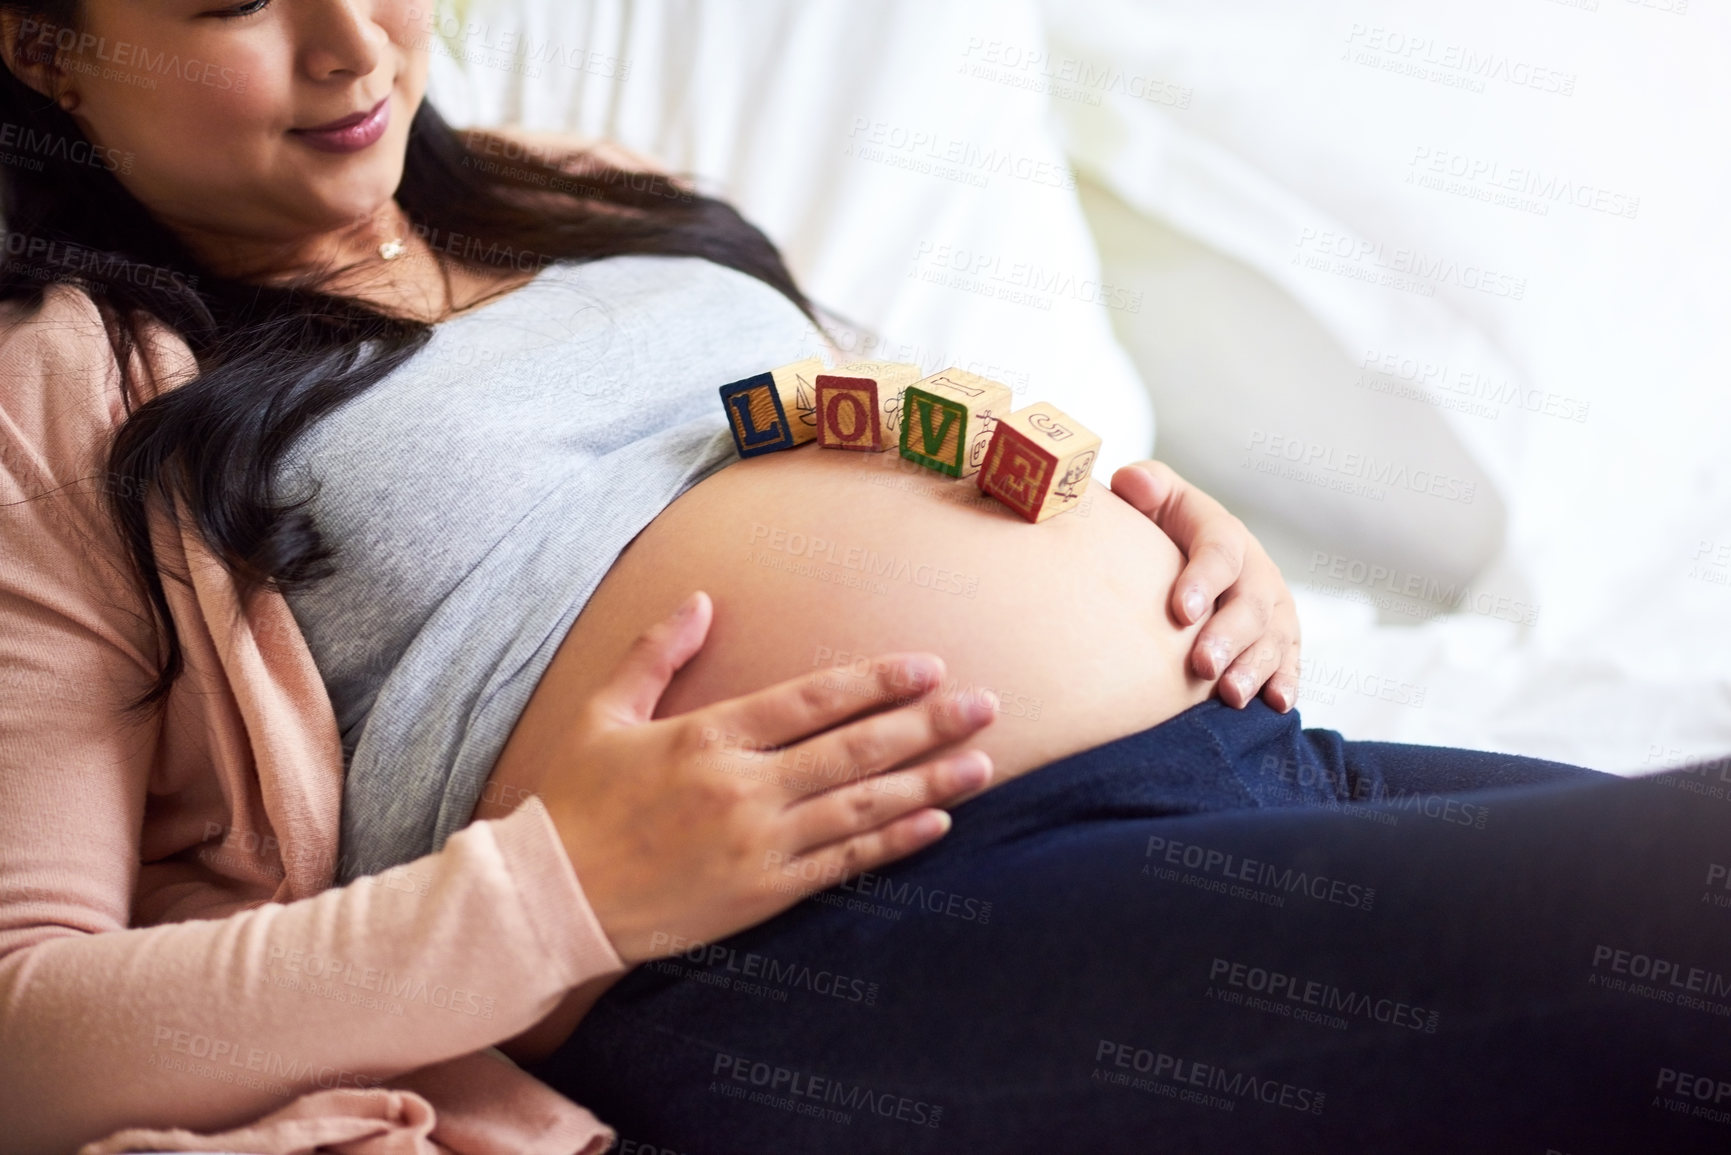 Buy stock photo Shot of a pregnant woman lying down with wooden baby blocks on her belly at home